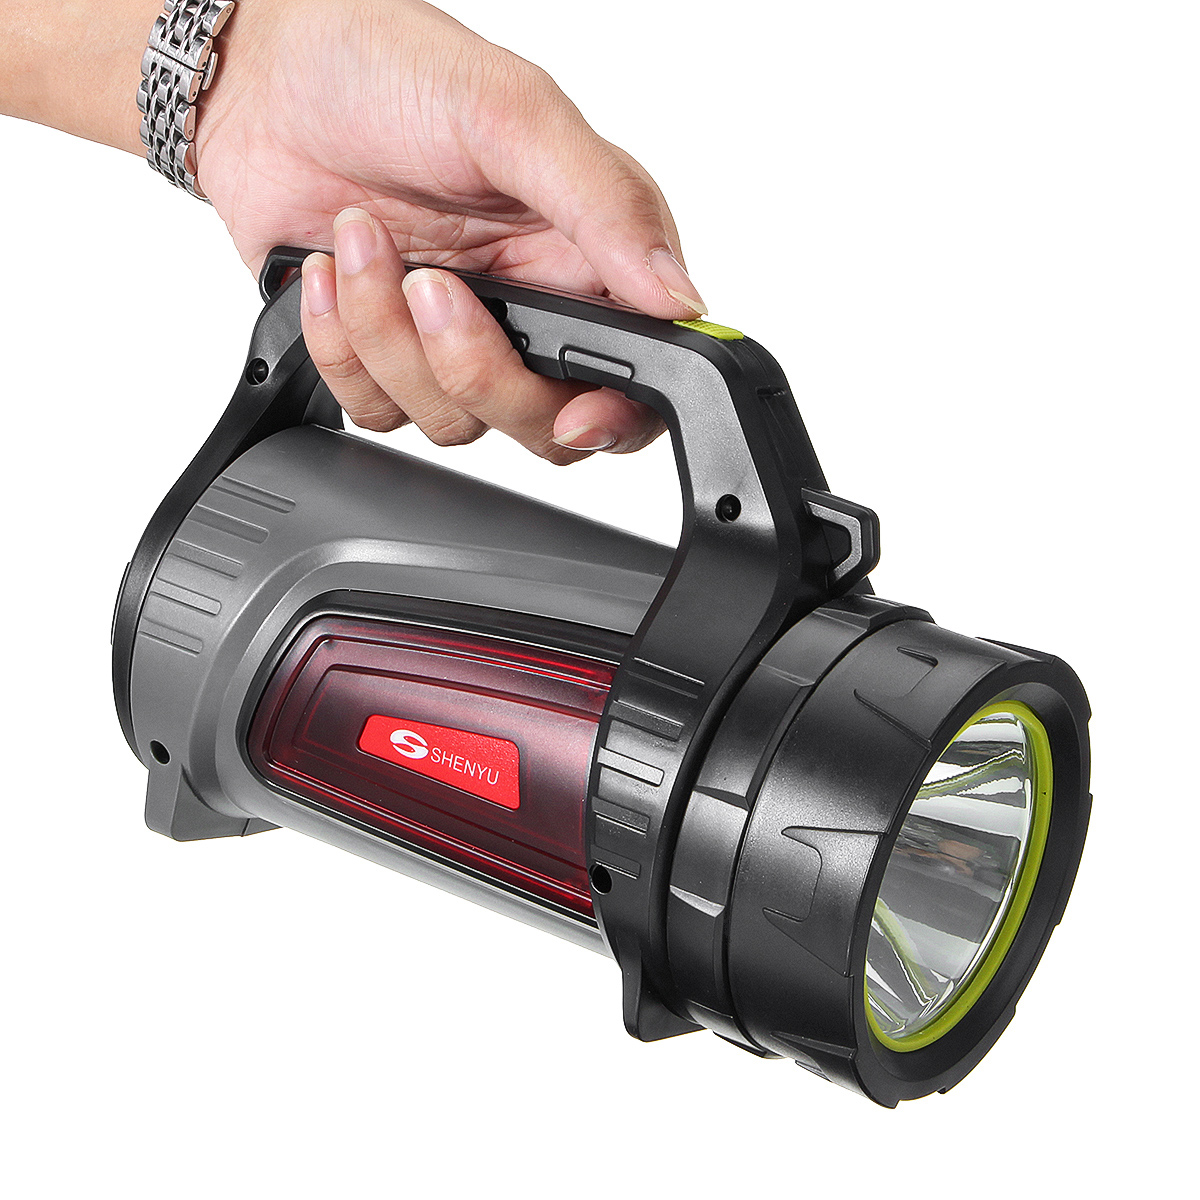 2000M-8000LM-USB-Rechargeable-Poratble-Flashlight-Outdoor-LED-Searching-Light-1605858